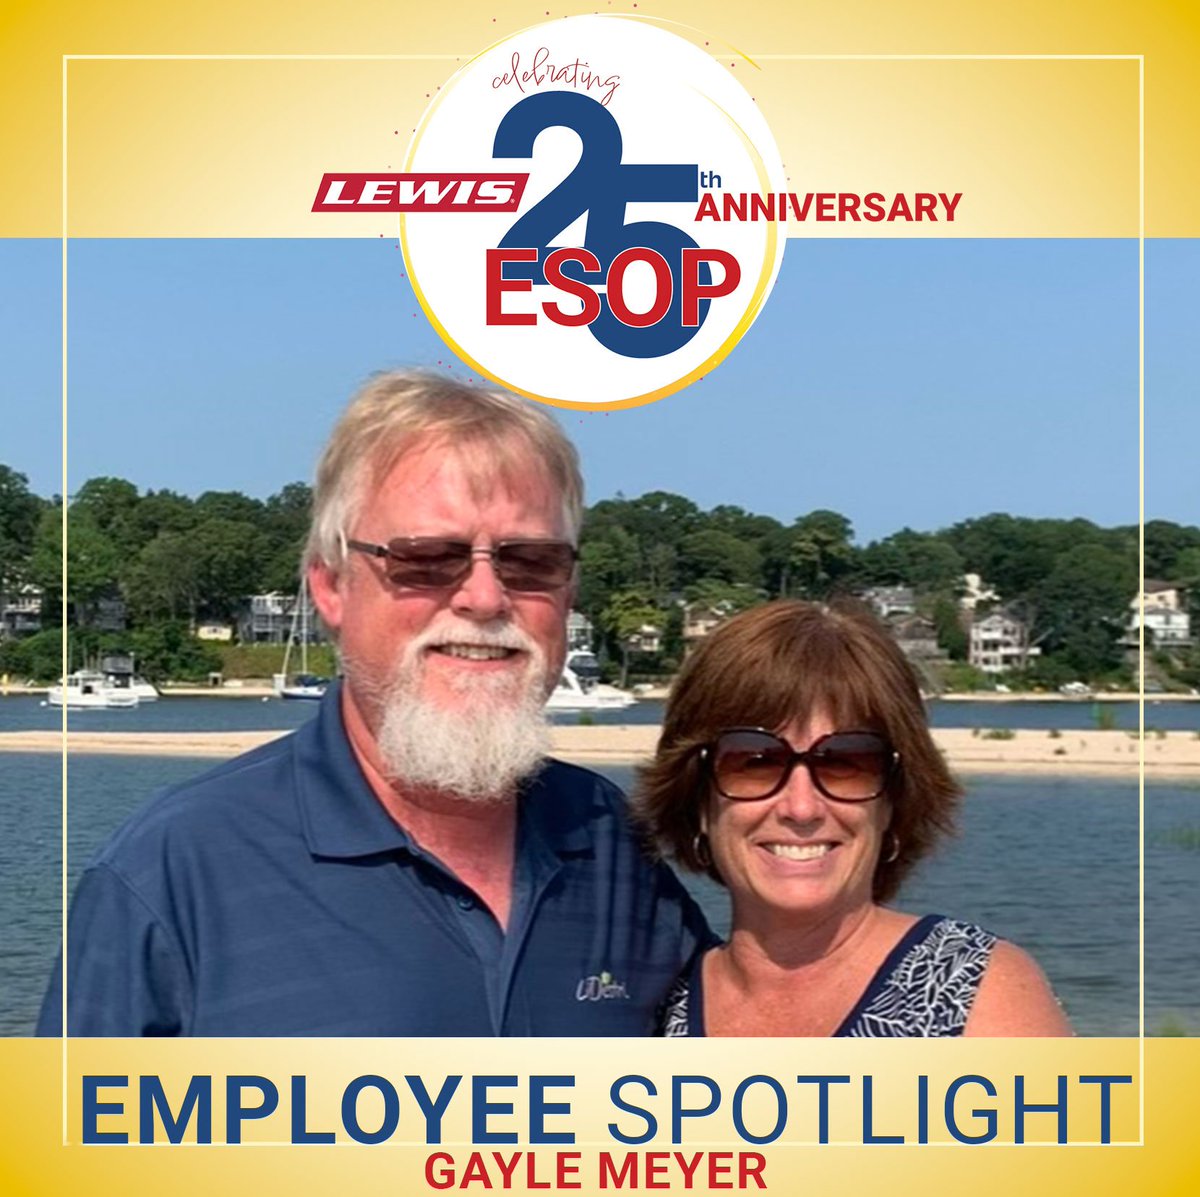 When she retires, Gayle Meyer looks forward to spending more time with her grandkids, camping, and continuing her search for Bigfoot. #ESOP #EmployeeOwnershipMonth #Bigfoot